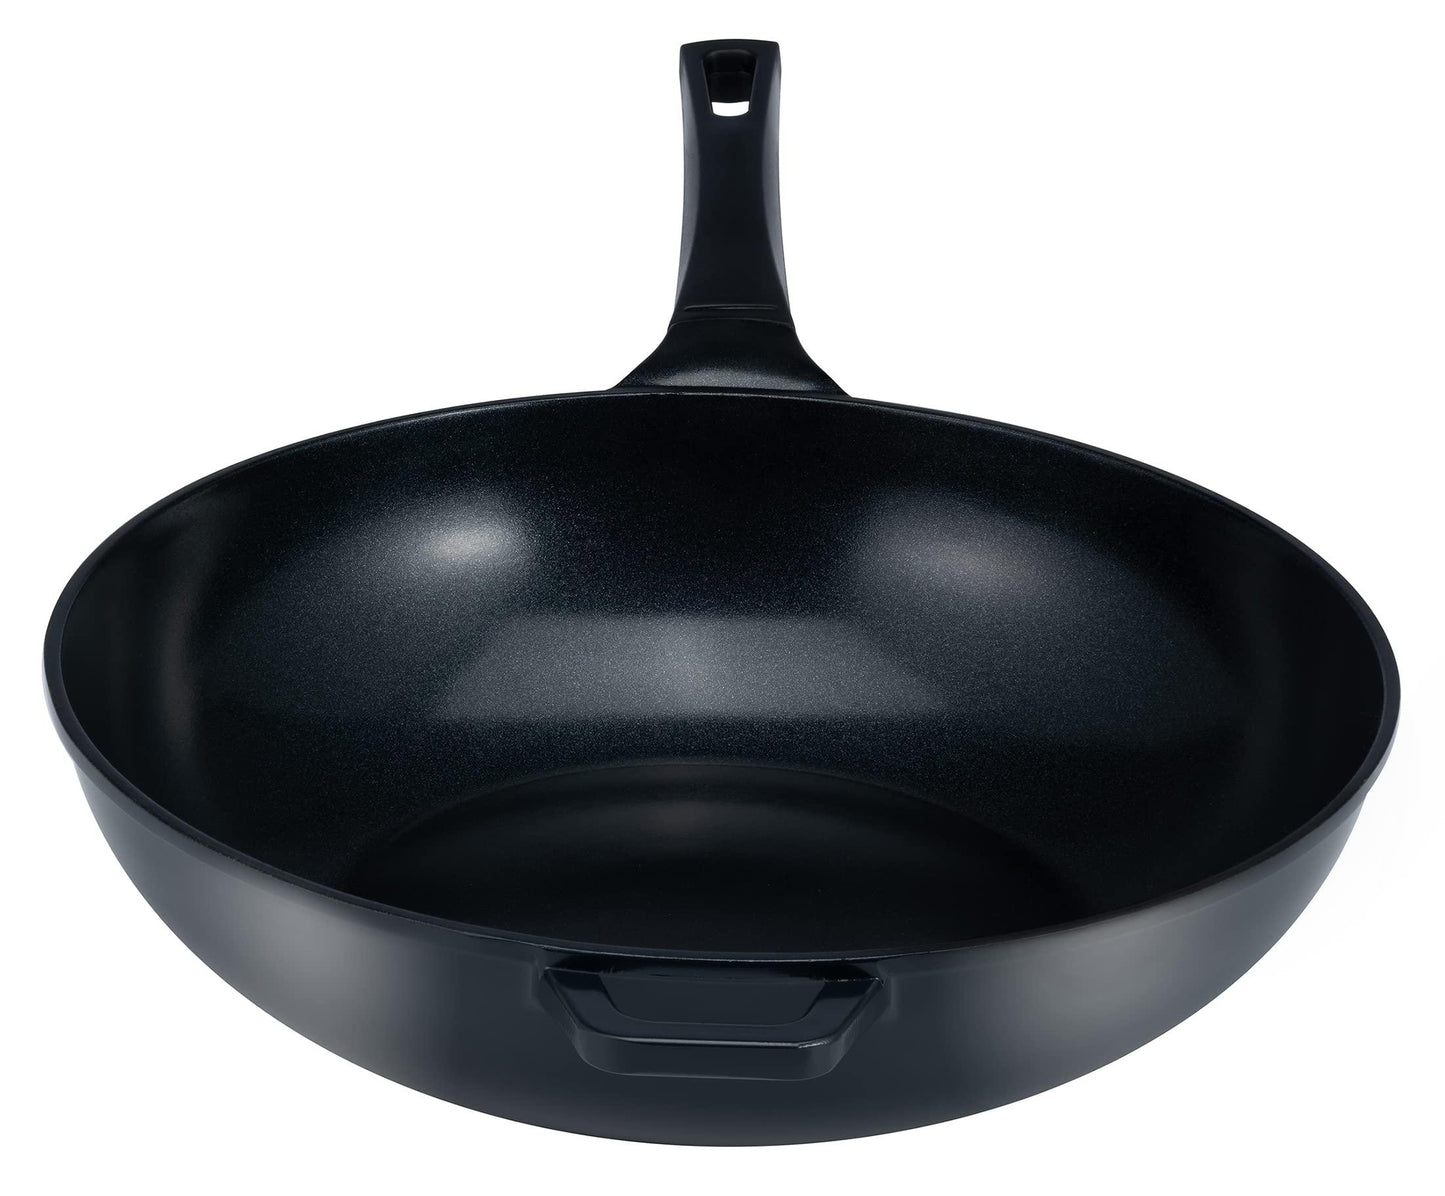 Ozeri 14" Green Ceramic Wok, with Smooth Ceramic Non-Stick Coating (100% PTFE and PFOA Free) - CookCave